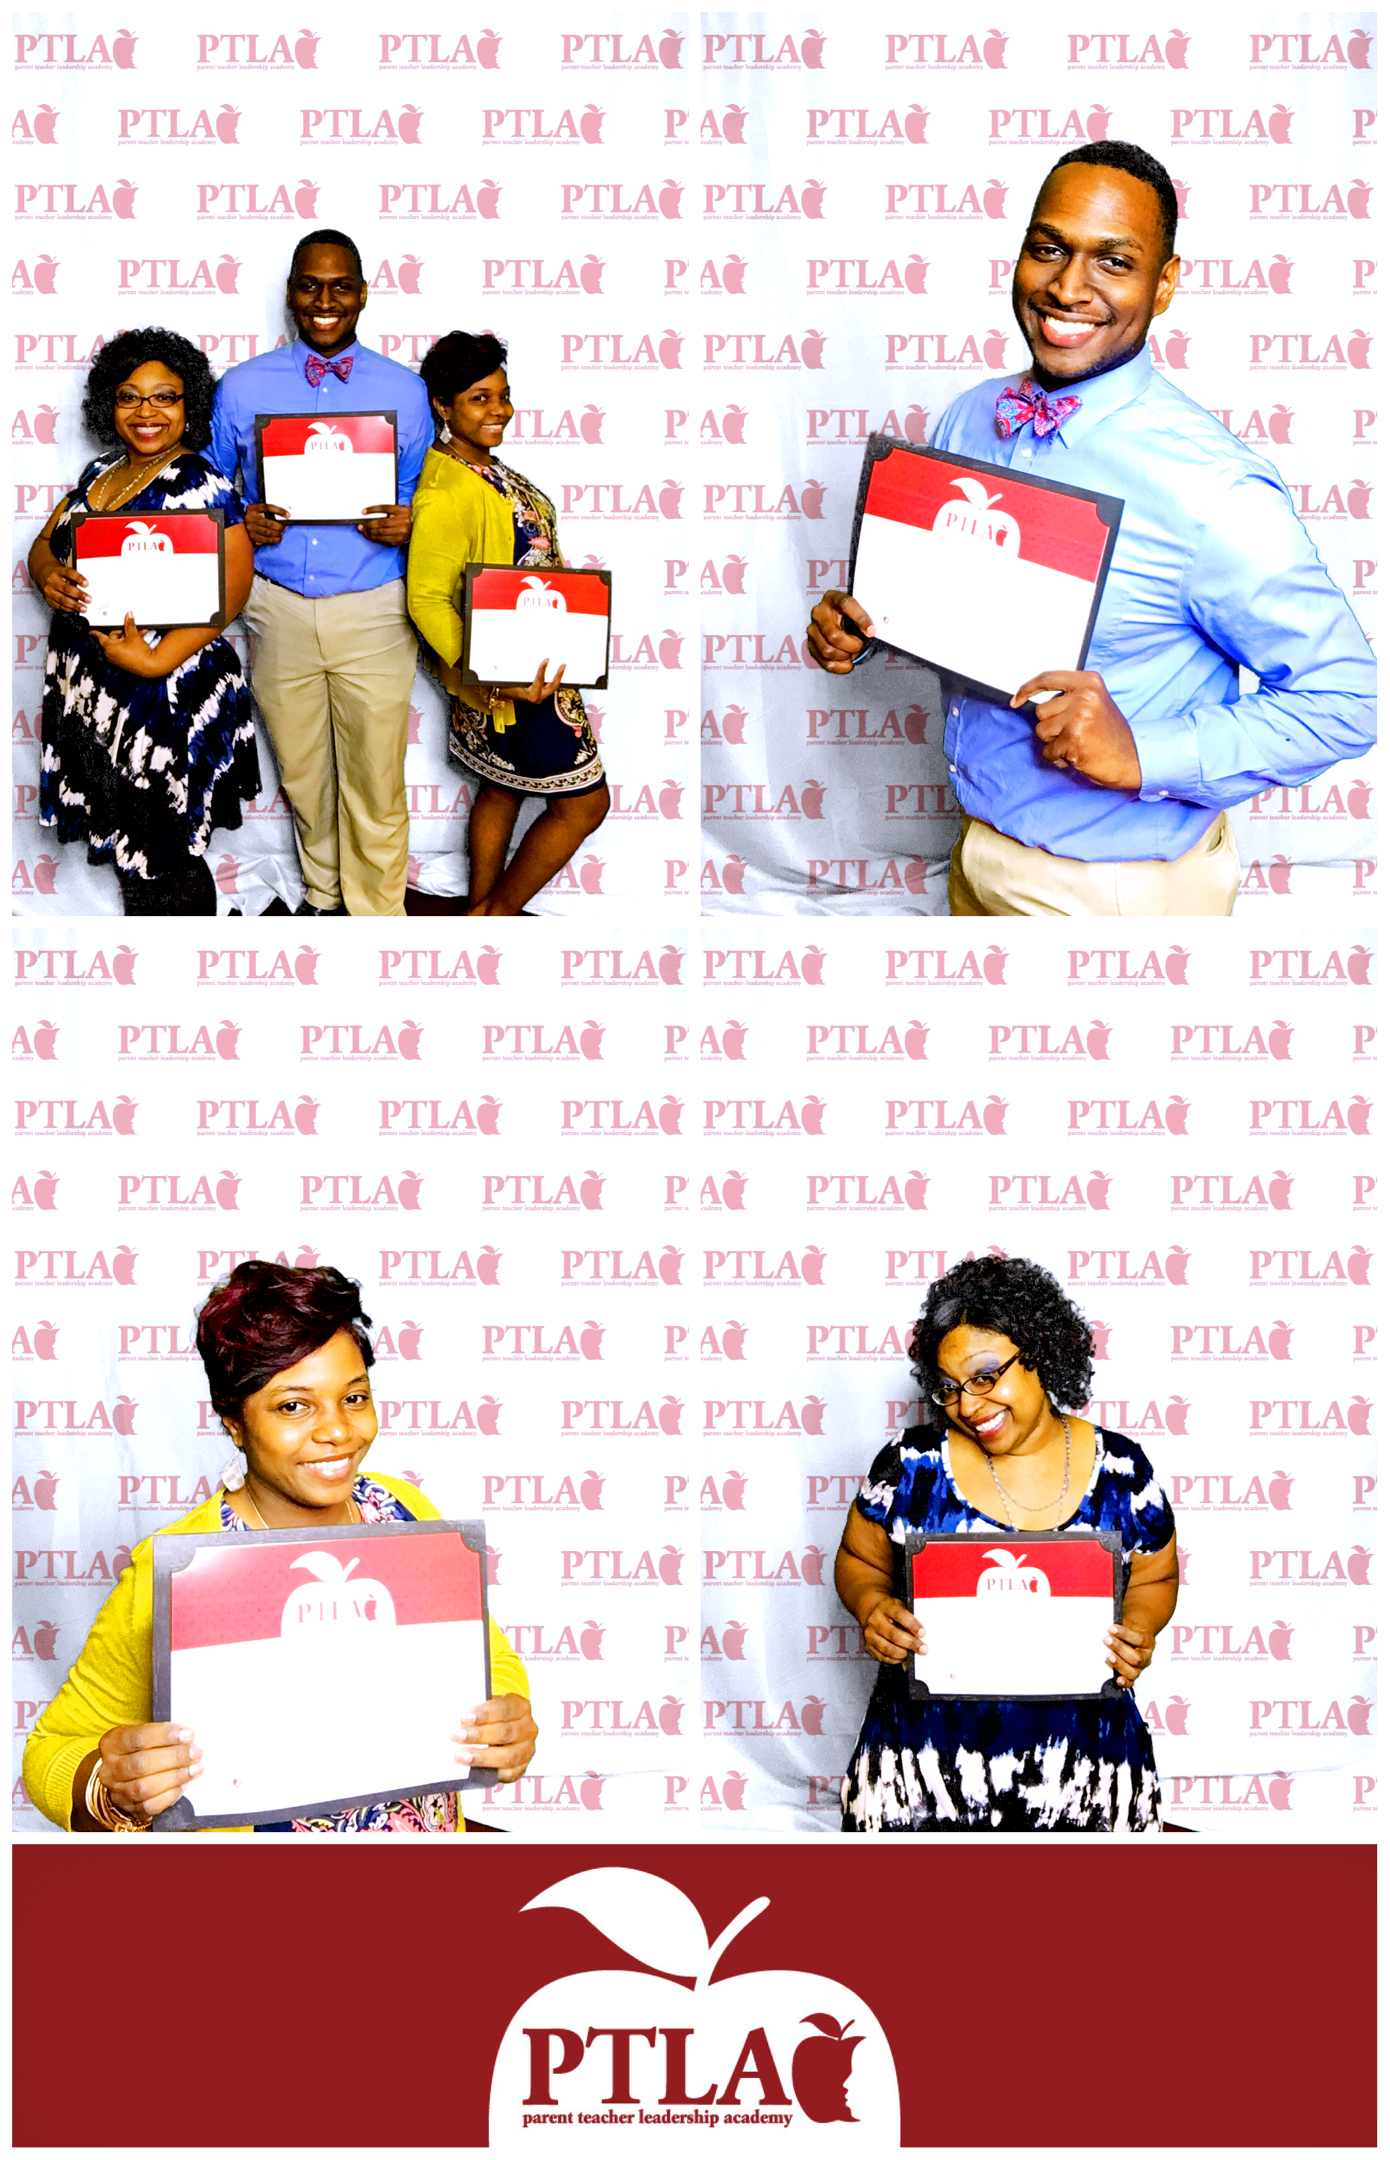 A photobooth proved to be a popular addition for the 2019 PTLA graduation, offering Academy participants the opportunity to mark the occasion with memorable candids.